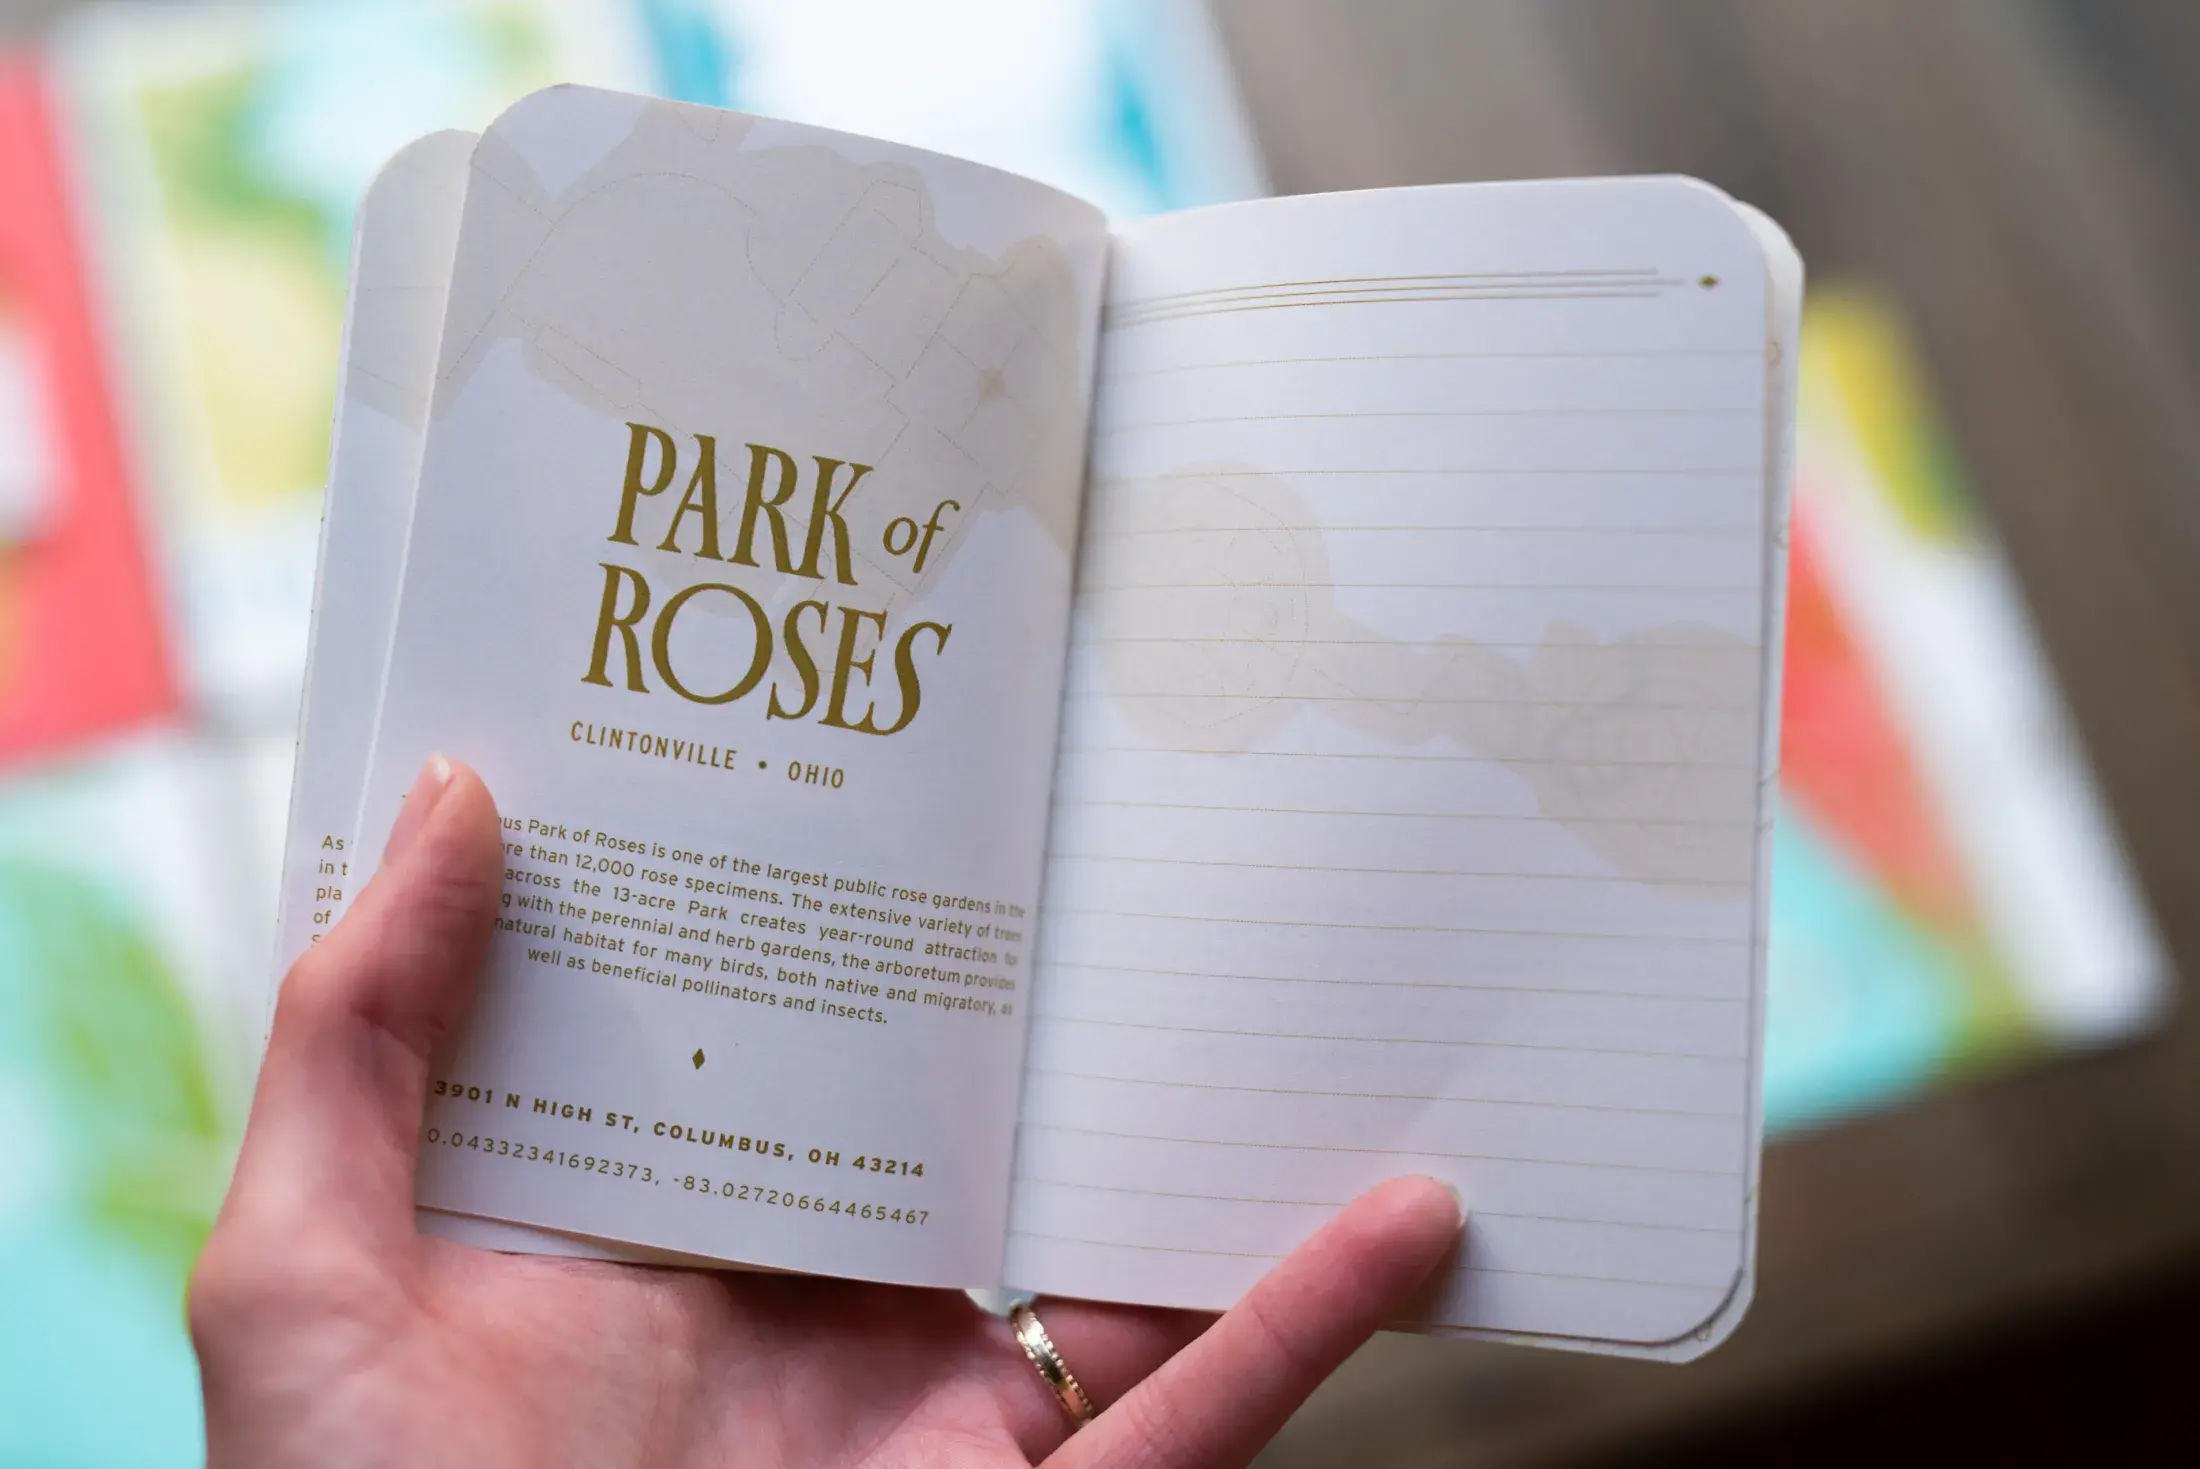 Park of Roses page inside the notebook